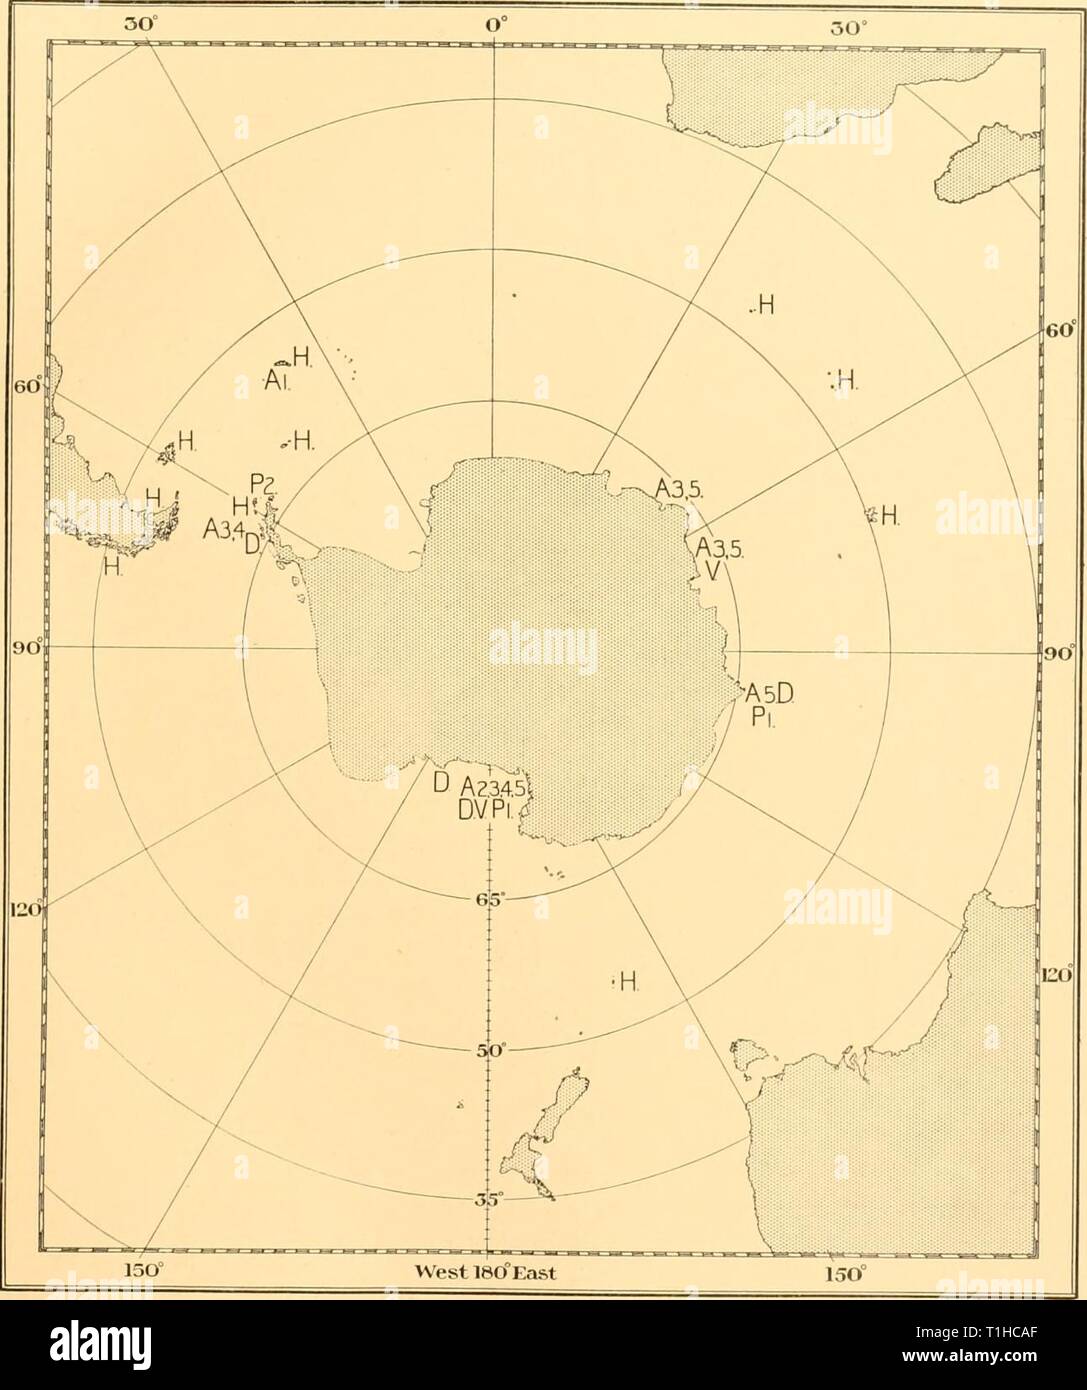 Discovery reports (1940) Discovery reports  discoveryreports18inst Year: 1940  ANTARCTIC ZONE 97 Trematomiis and Pleiirogramma are restricted to this district, and of the 7 species of Notothenia, 5 are peculiar, only A'', coriiceps and A. rossii ranging to the Kerguelen- Macquarie District. A. angustifrons is confined to South Georgia and the South Sand- wich Islands. Dissostichus is represented by D. mawsoni in this district, and there is one other species {D. eleginoides) in the Patagonian Region of the Subantarctic Zone.    Fig. 60. Known distribution of Harpagiferidae. A i, Artedidraco min Stock Photo